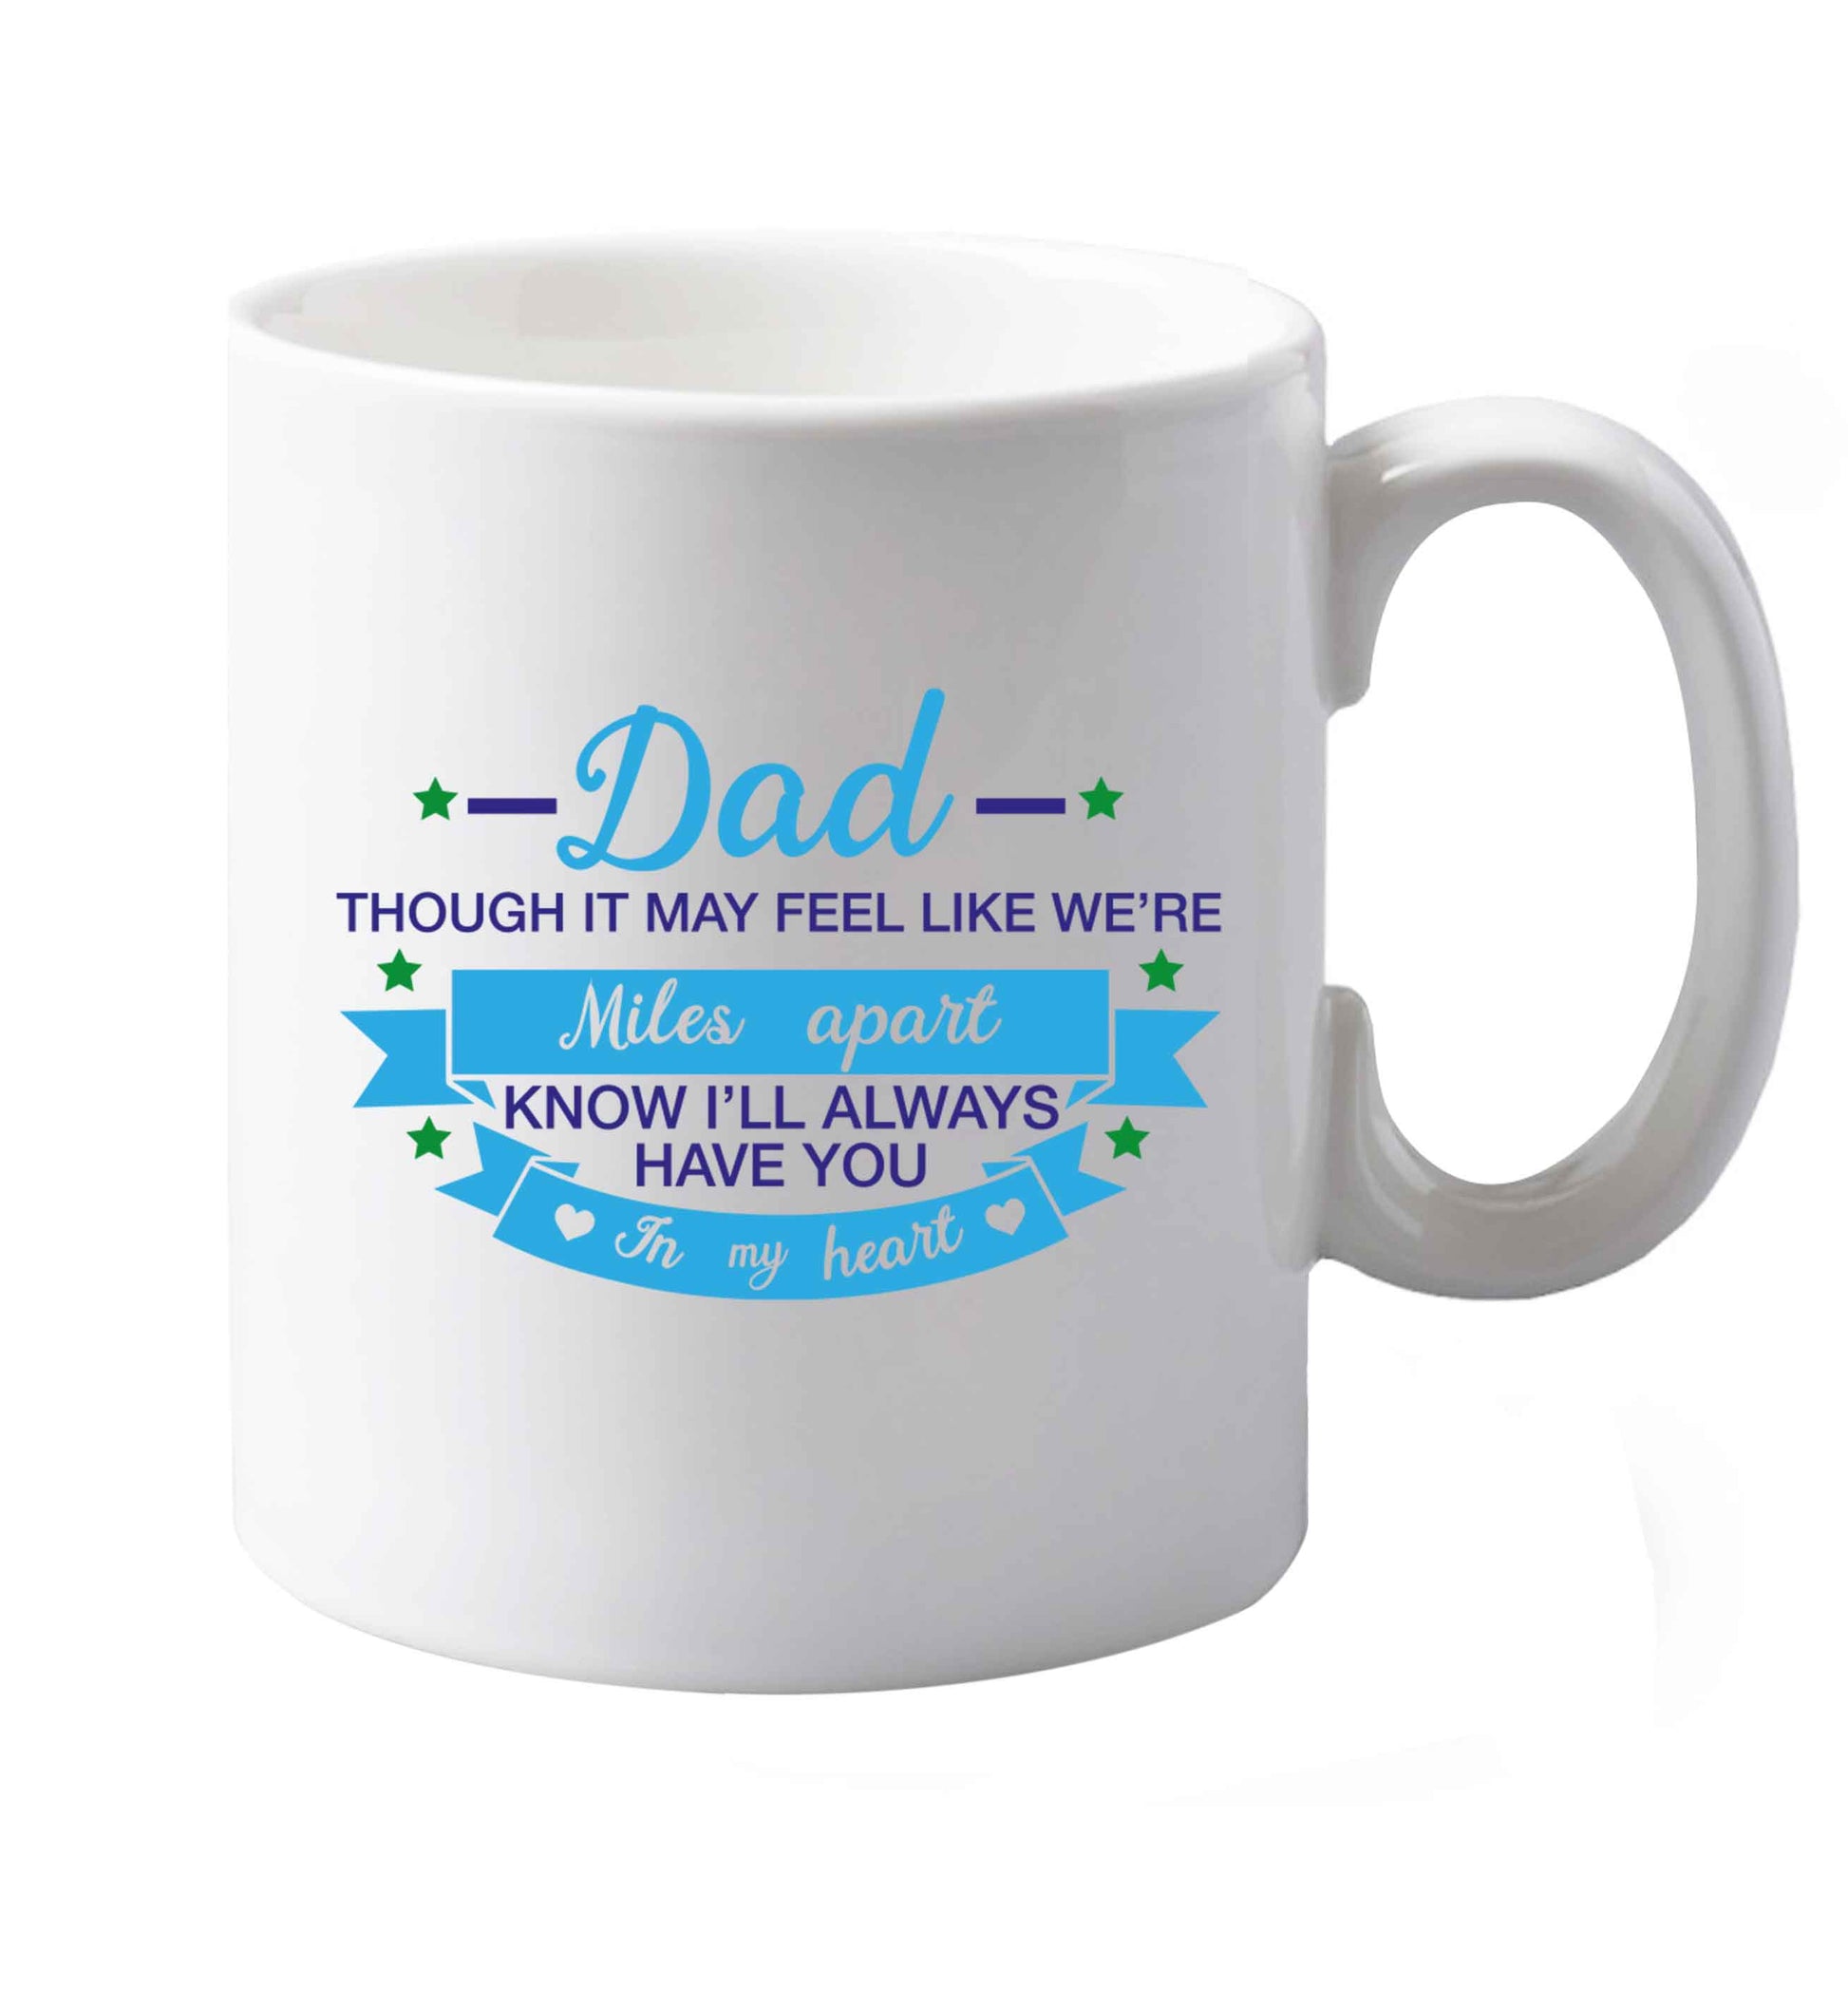 10 oz Dad though it may feel like we're miles apart know I'll always have you in my heart ceramic mug both sides